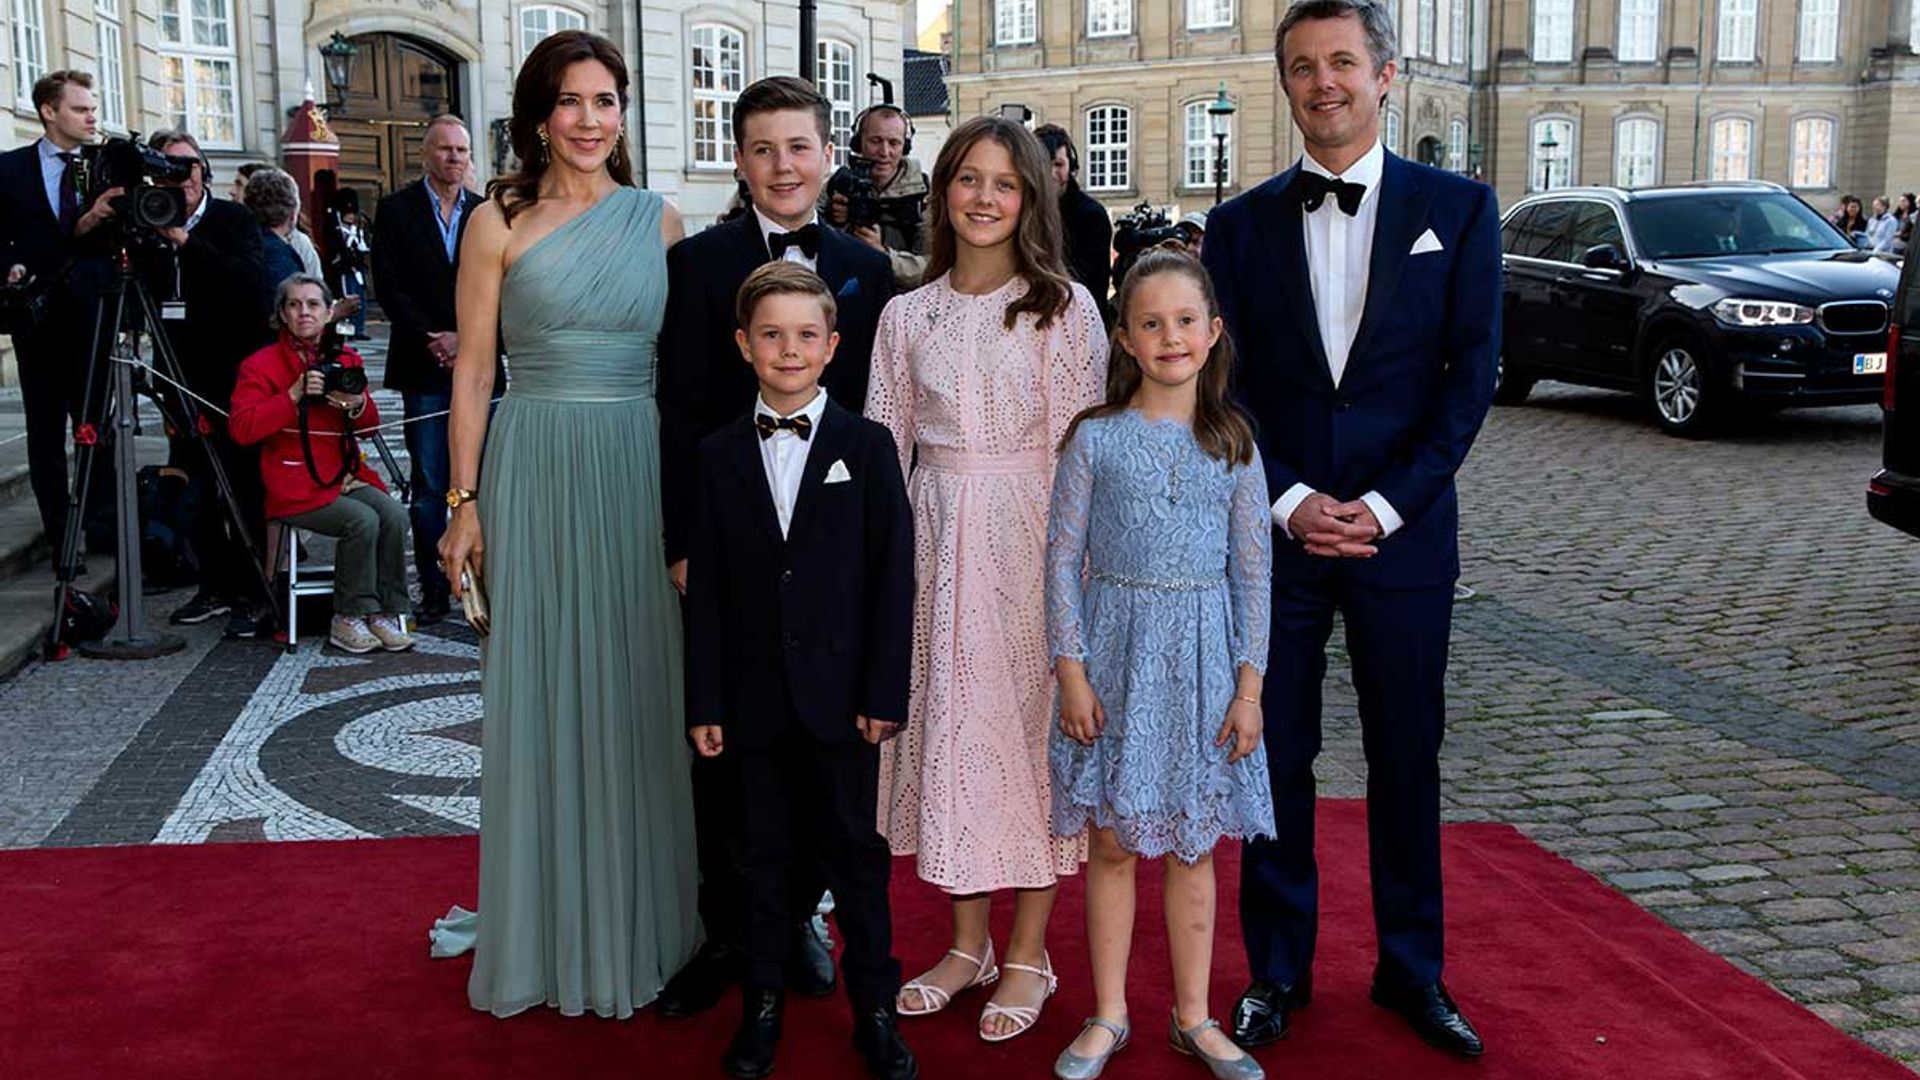 Princess Mary of Denmark takes inspiration from Kate Middleton with birthday portrait of twins